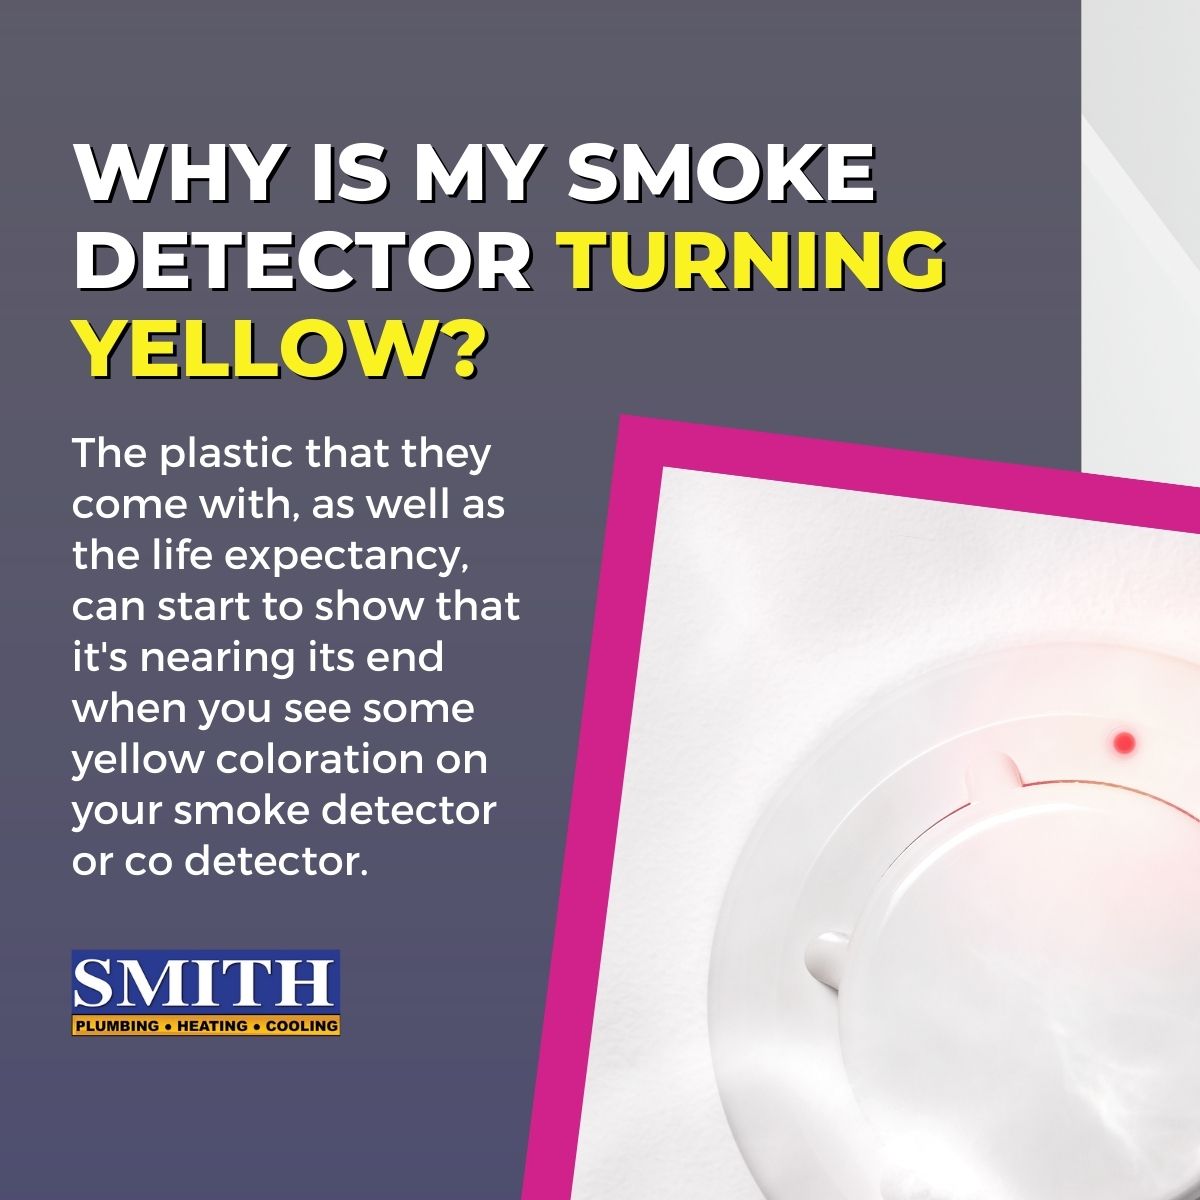 Why is my smoke detector turning yellow?